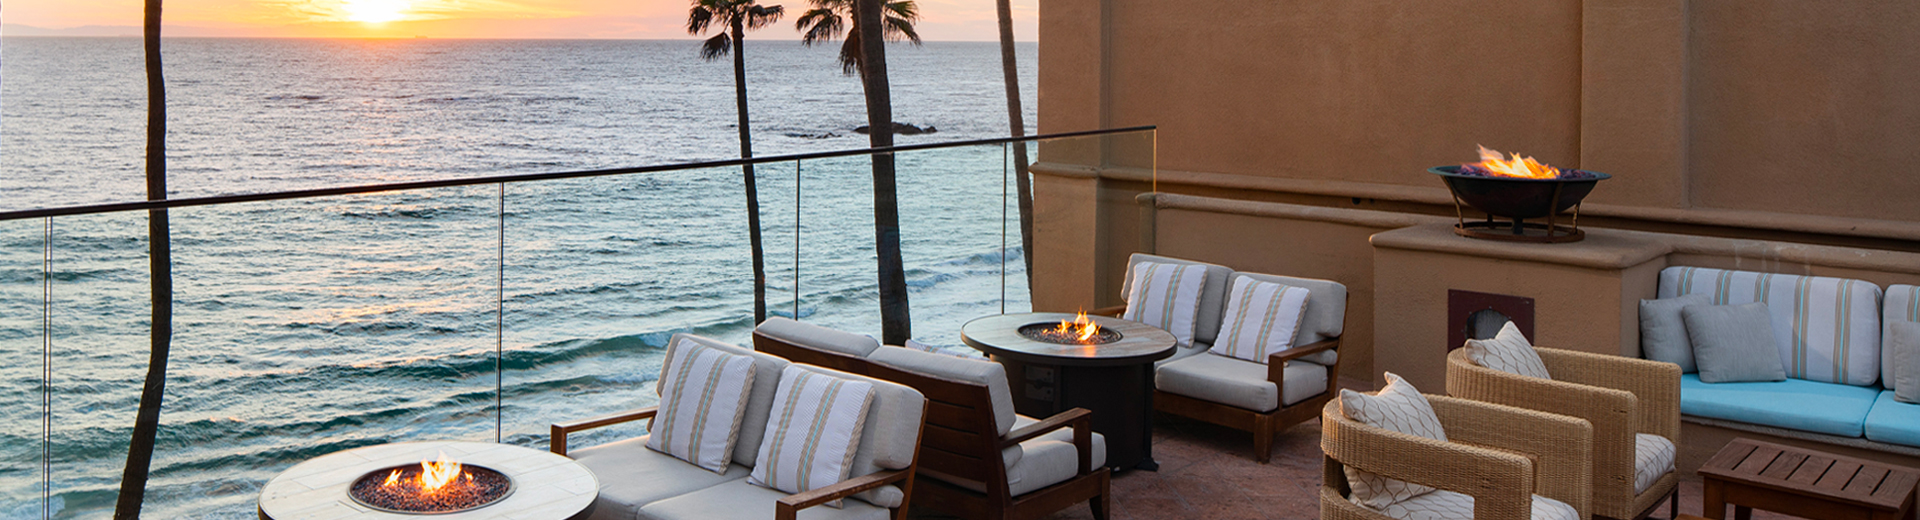 patio next to the ocean with seating and firepits